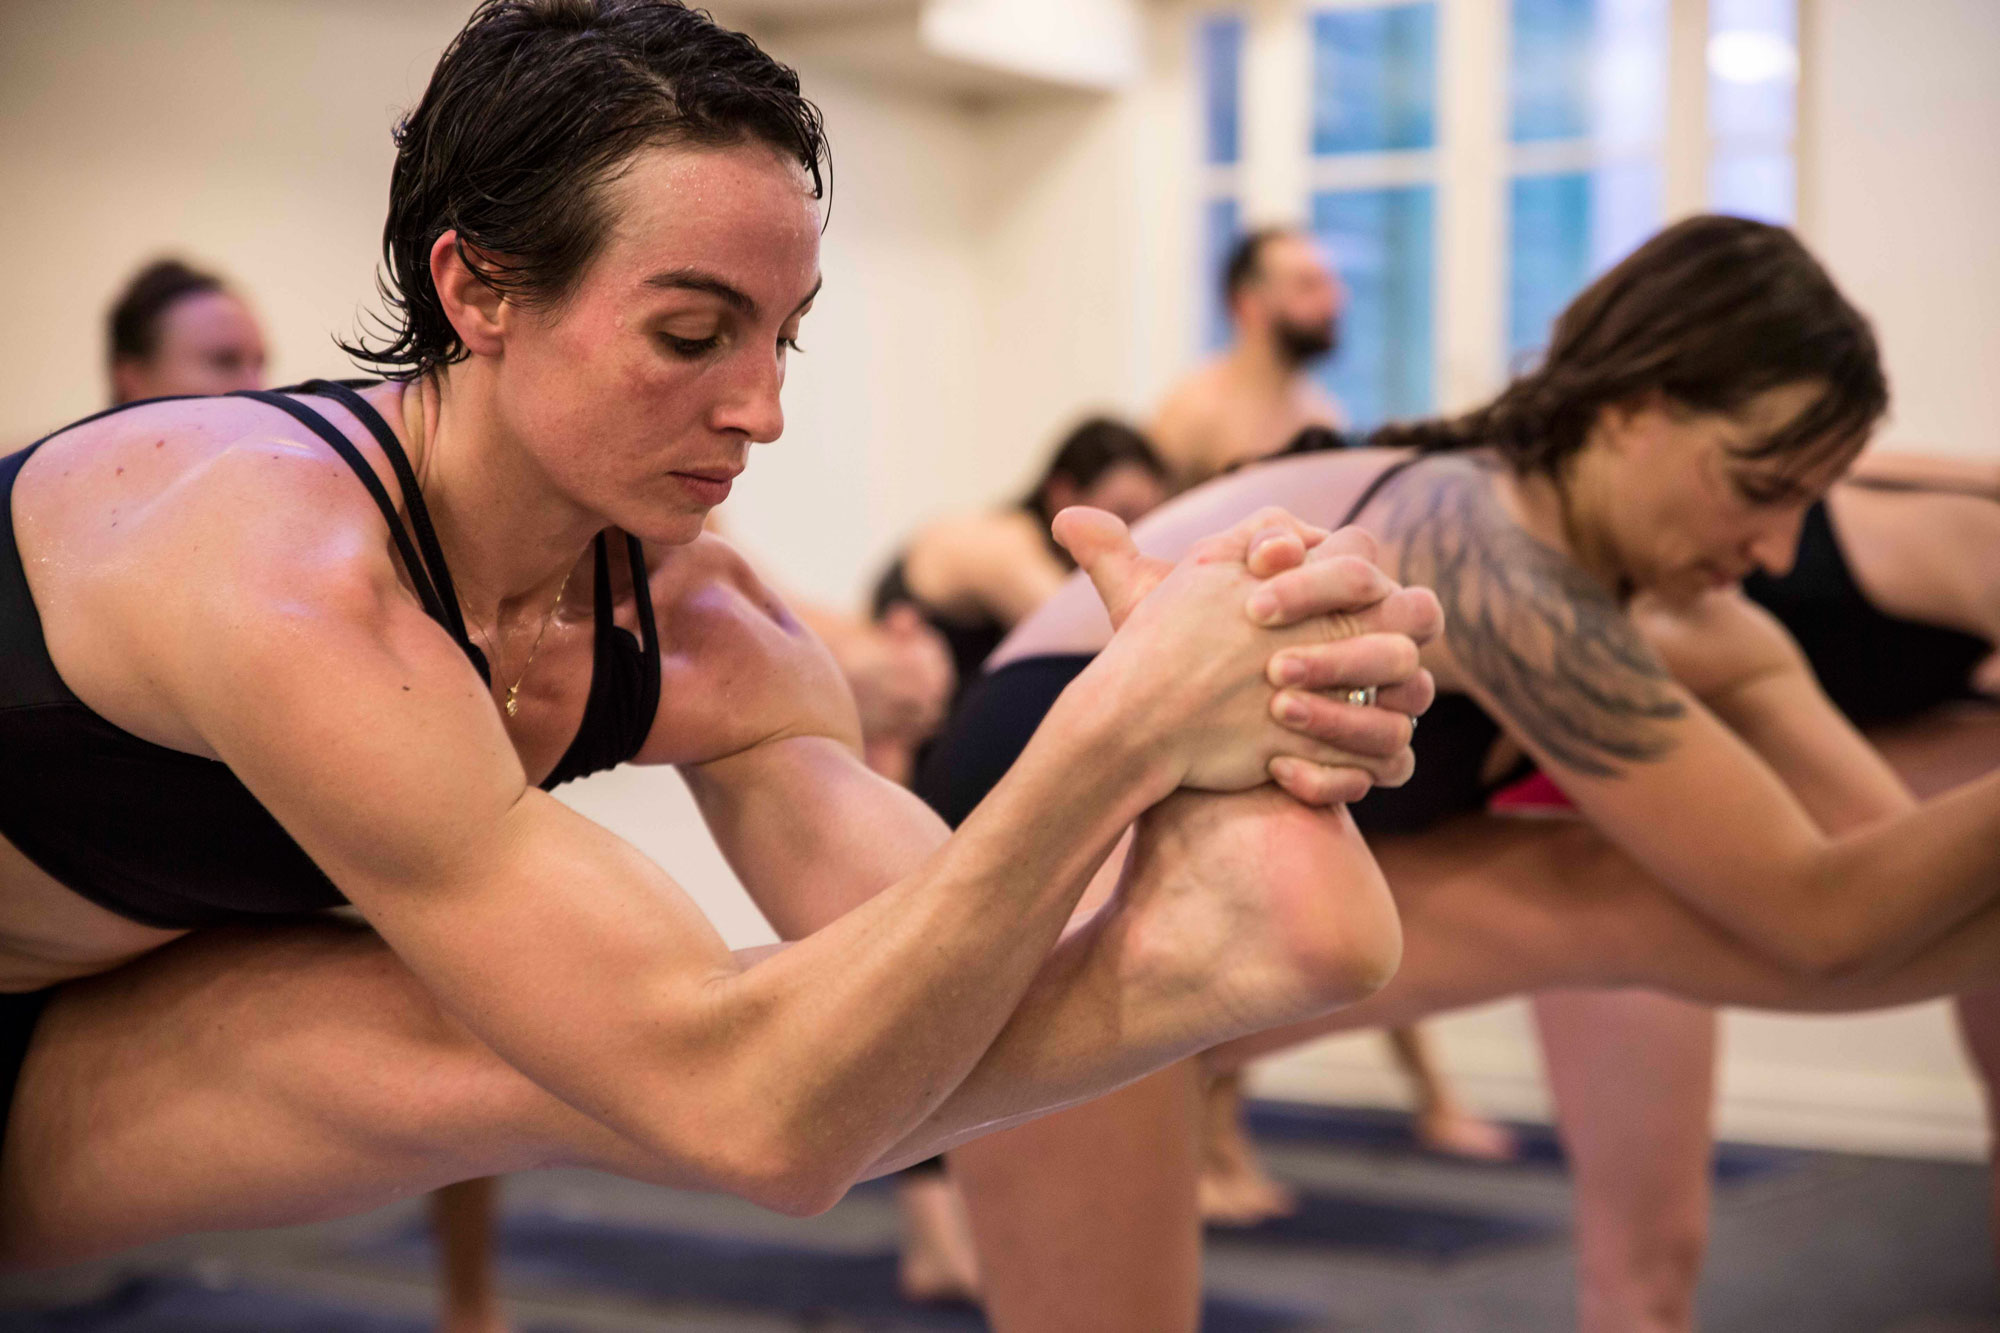 There's a Ridiculous $1 Million Lawsuit Riding on Whether These Yoga Poses  Are Too Similar